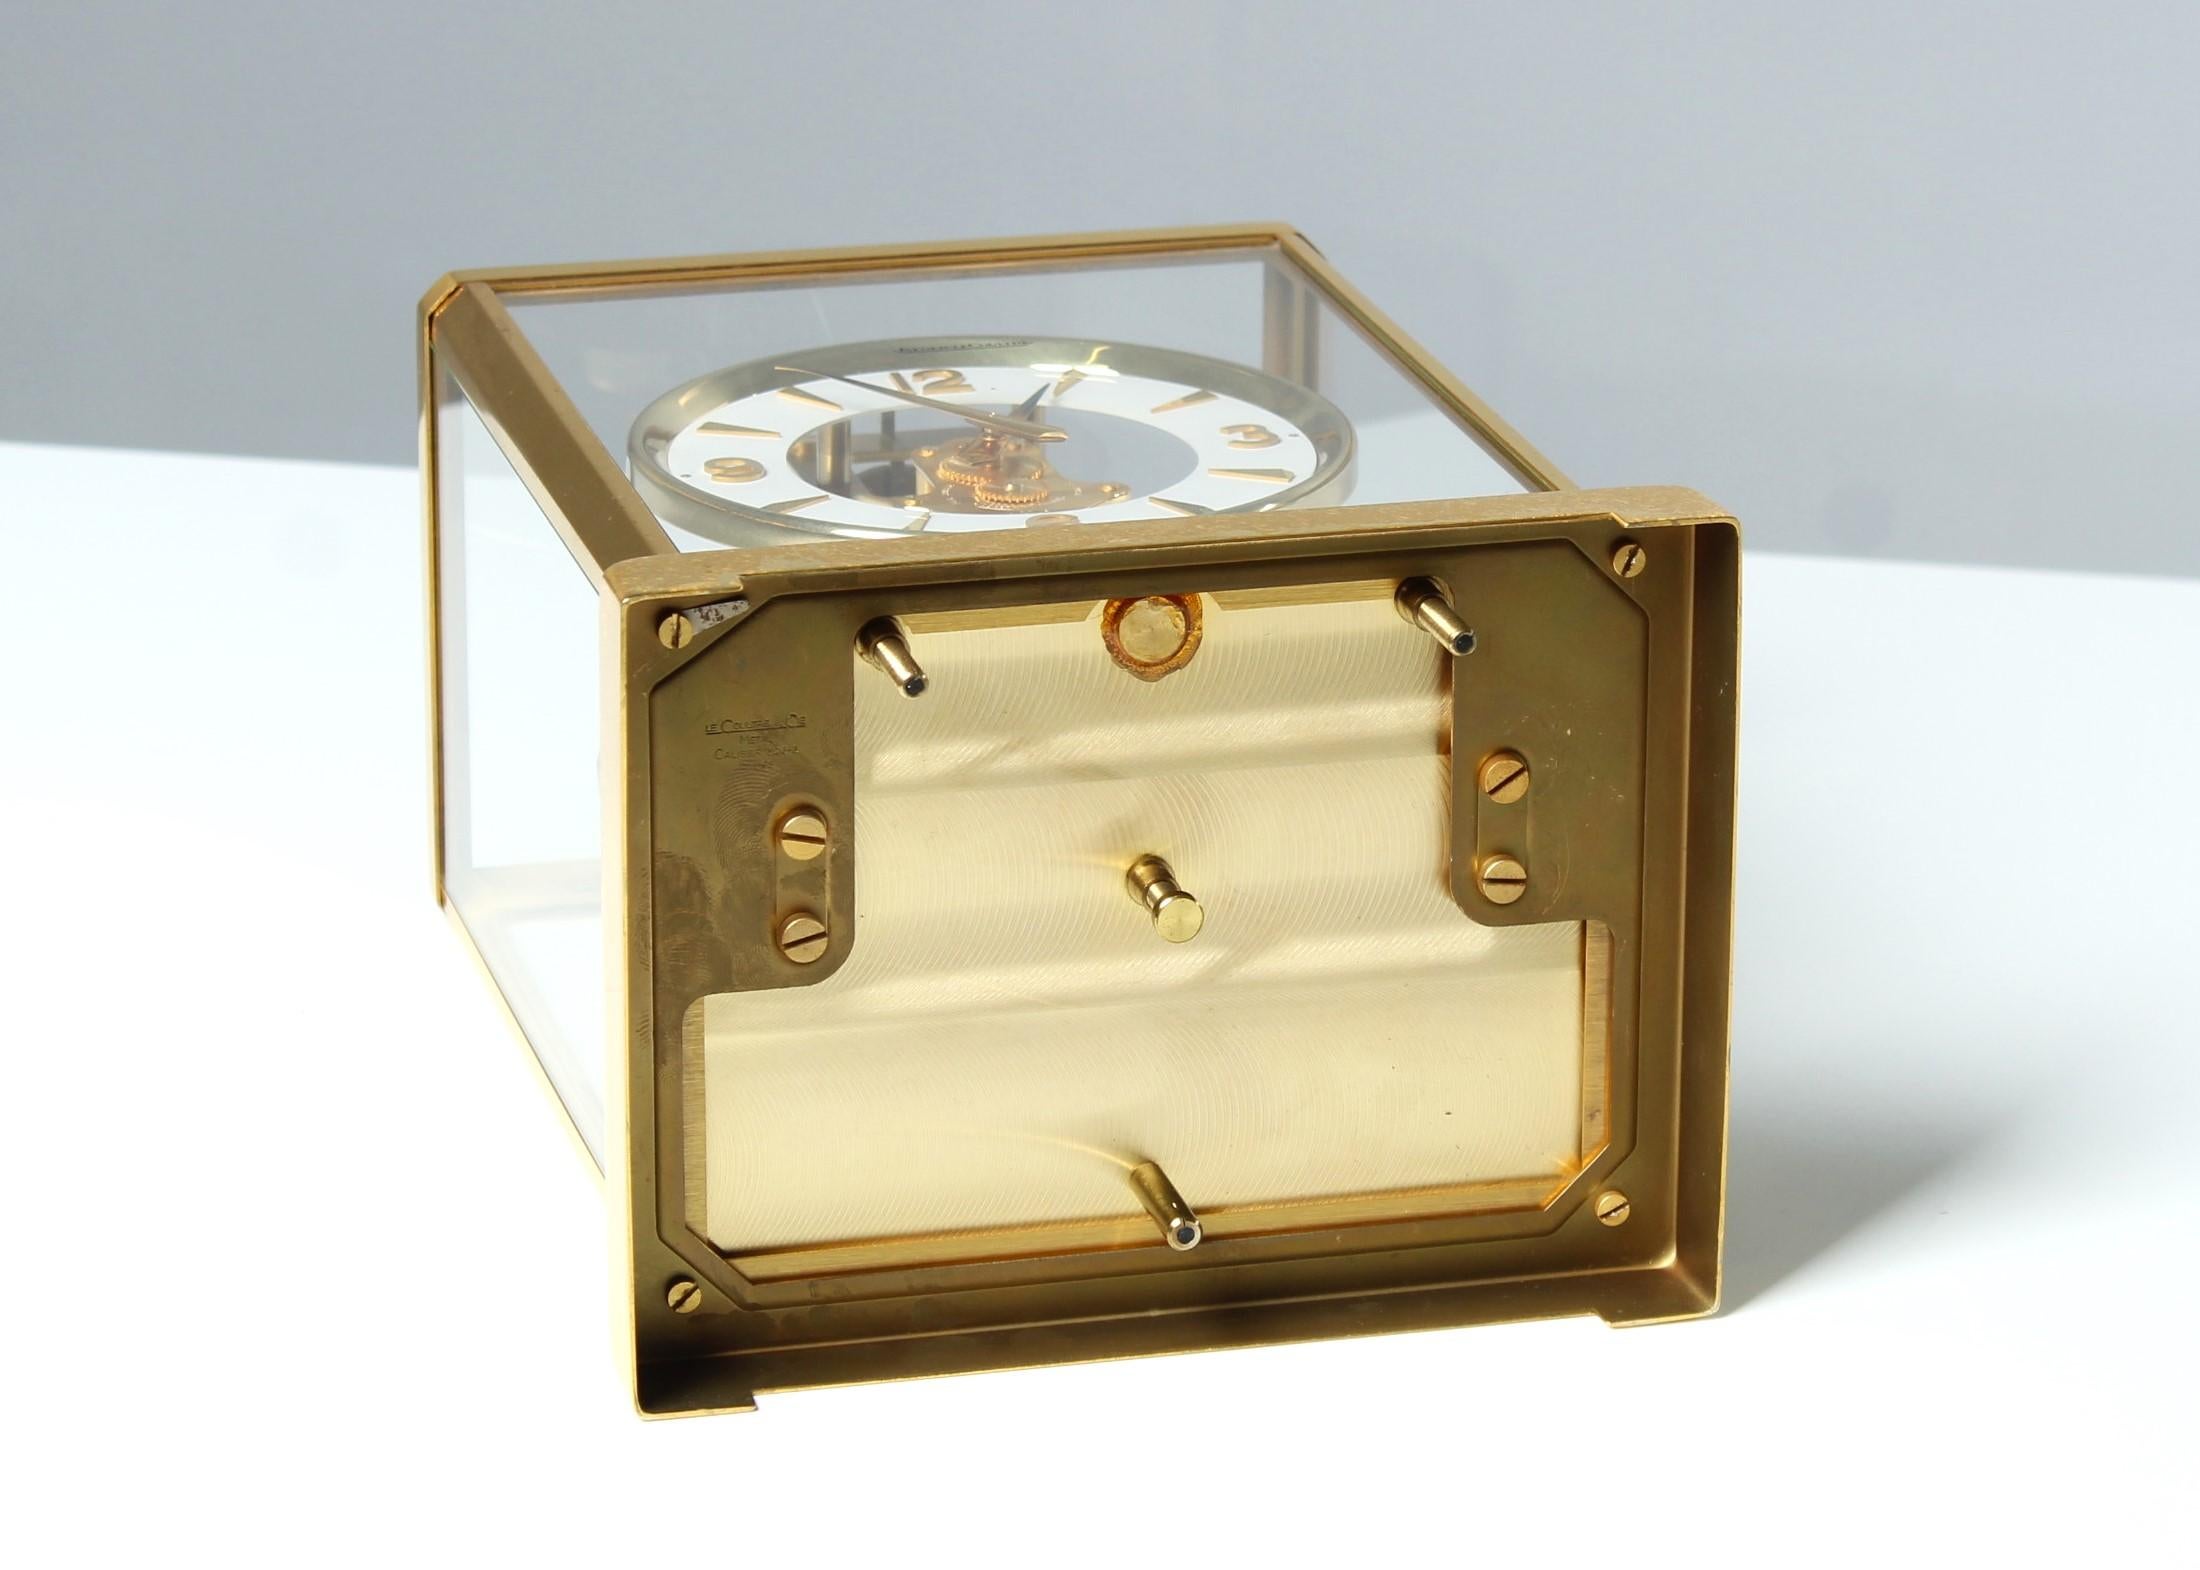 Jaeger LeCoultre, Atmos Clock with Original Box, Swiss Made in 1965 13